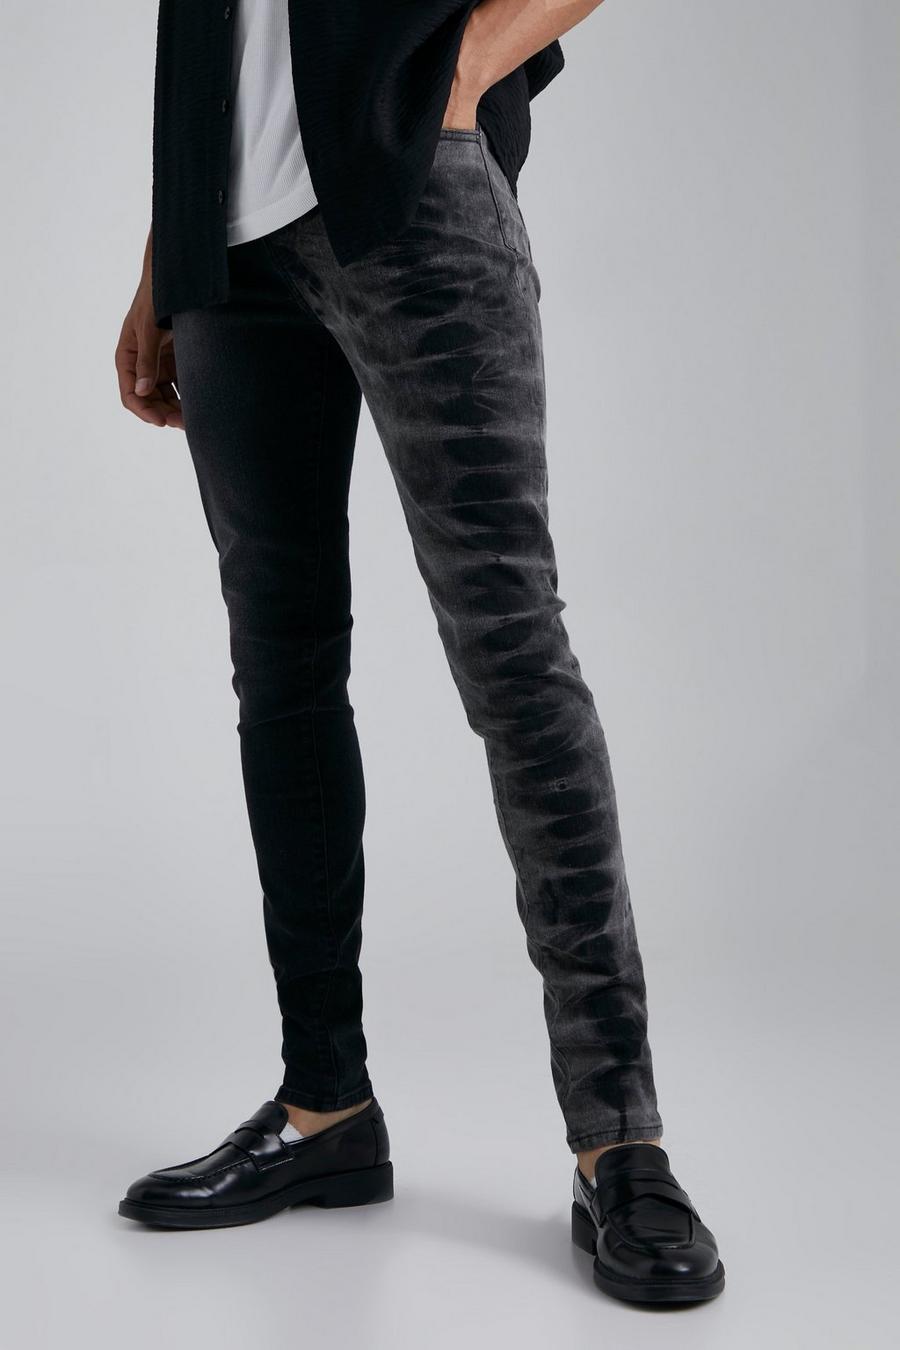 Jeans Tall Skinny Fit Stretch in fantasia tie dye a effetto patchwork, Black negro